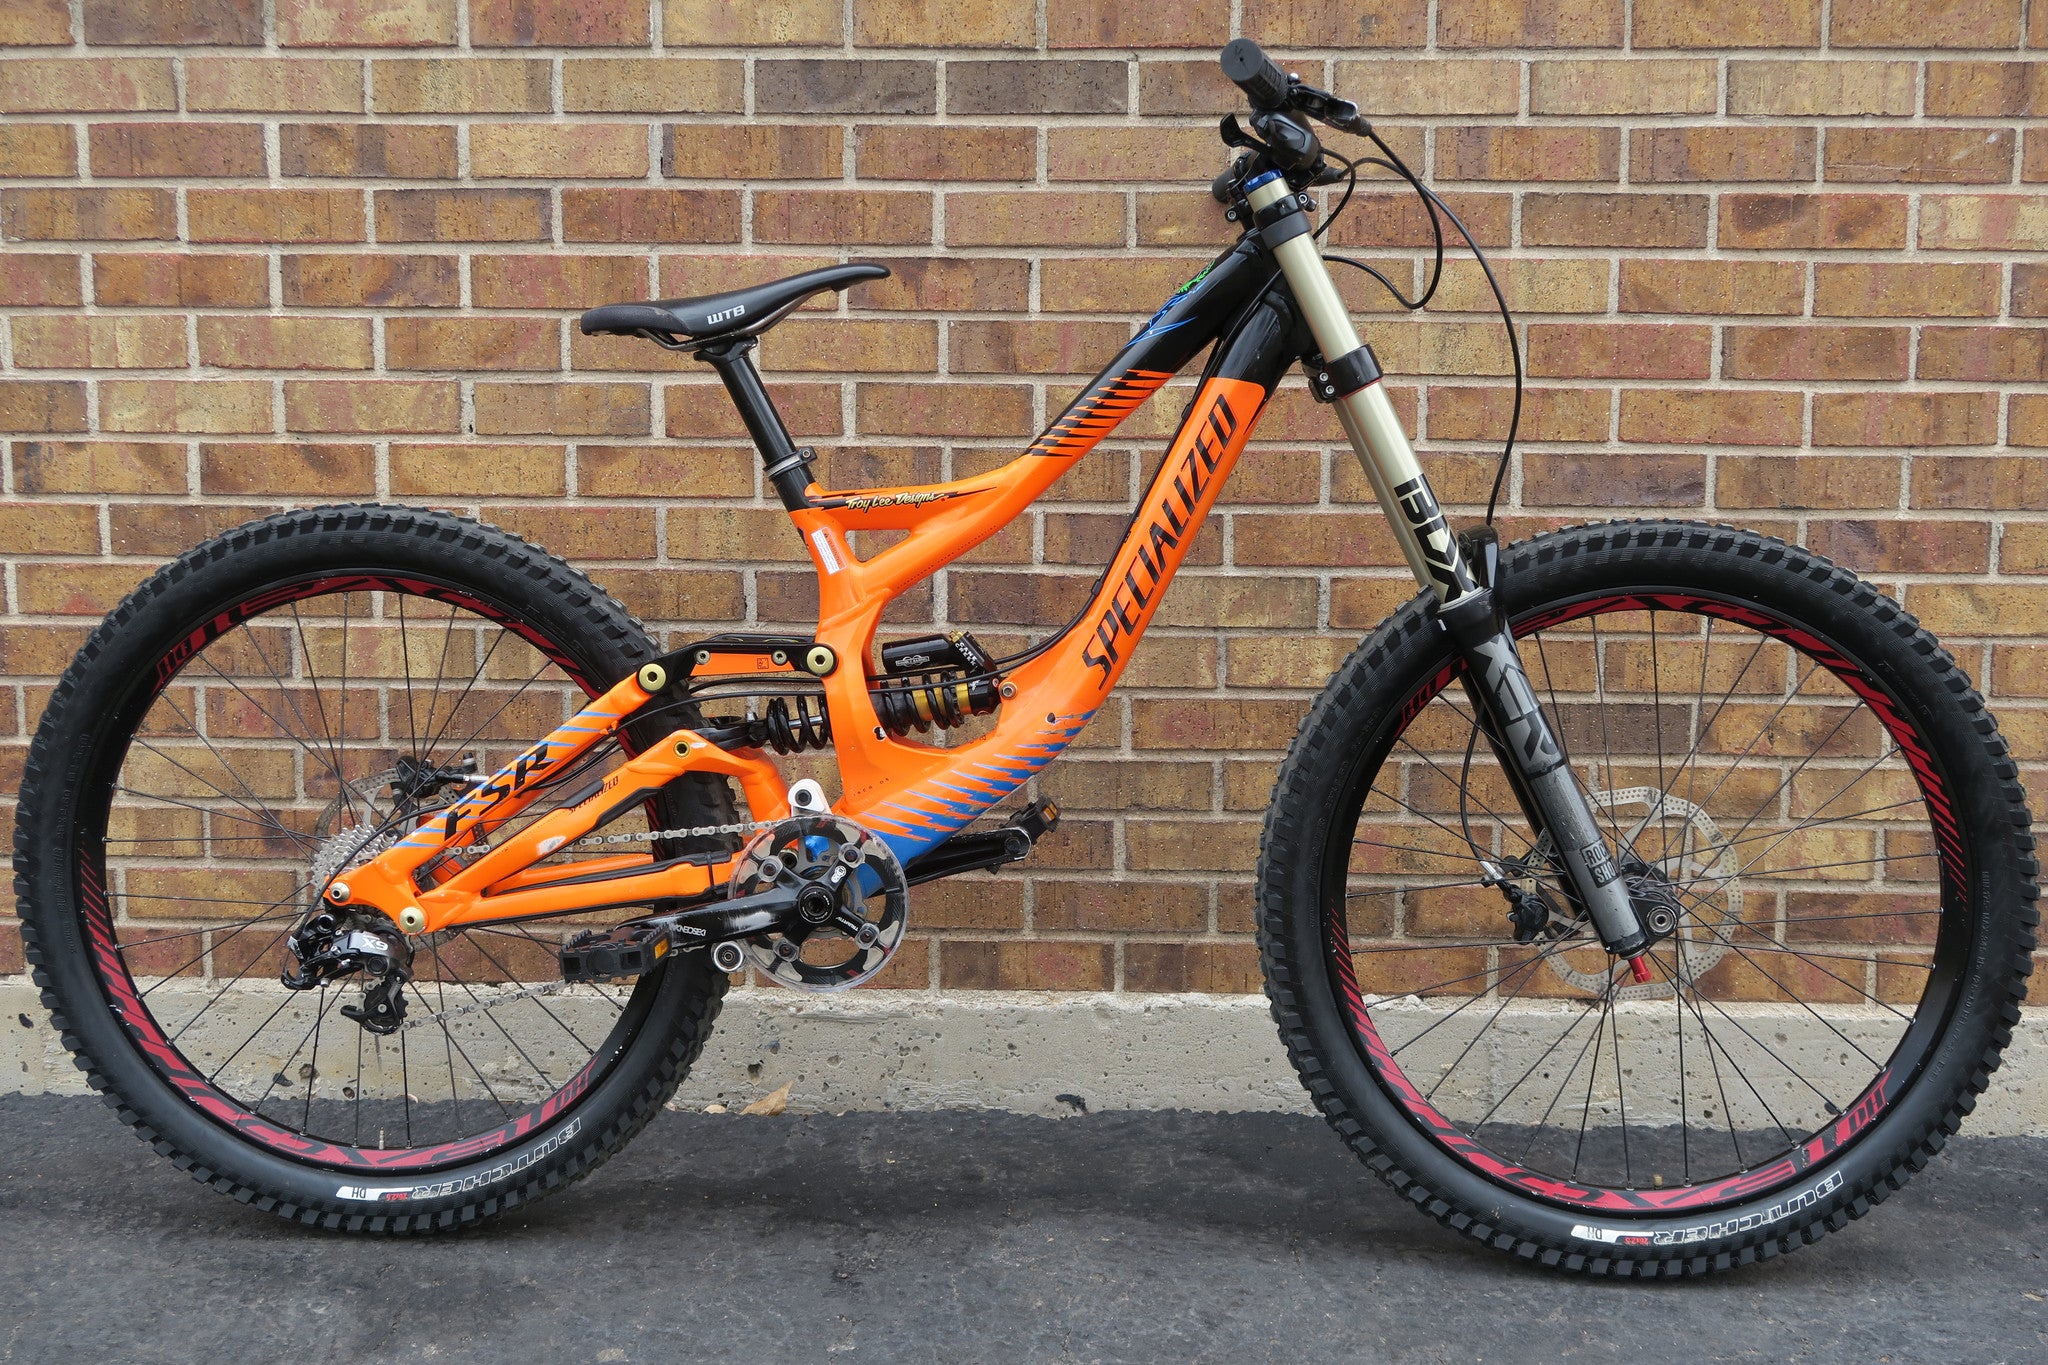 2012 SPECIALIZED DEMO 8 TROY LEE DESIGNS Limited Edition